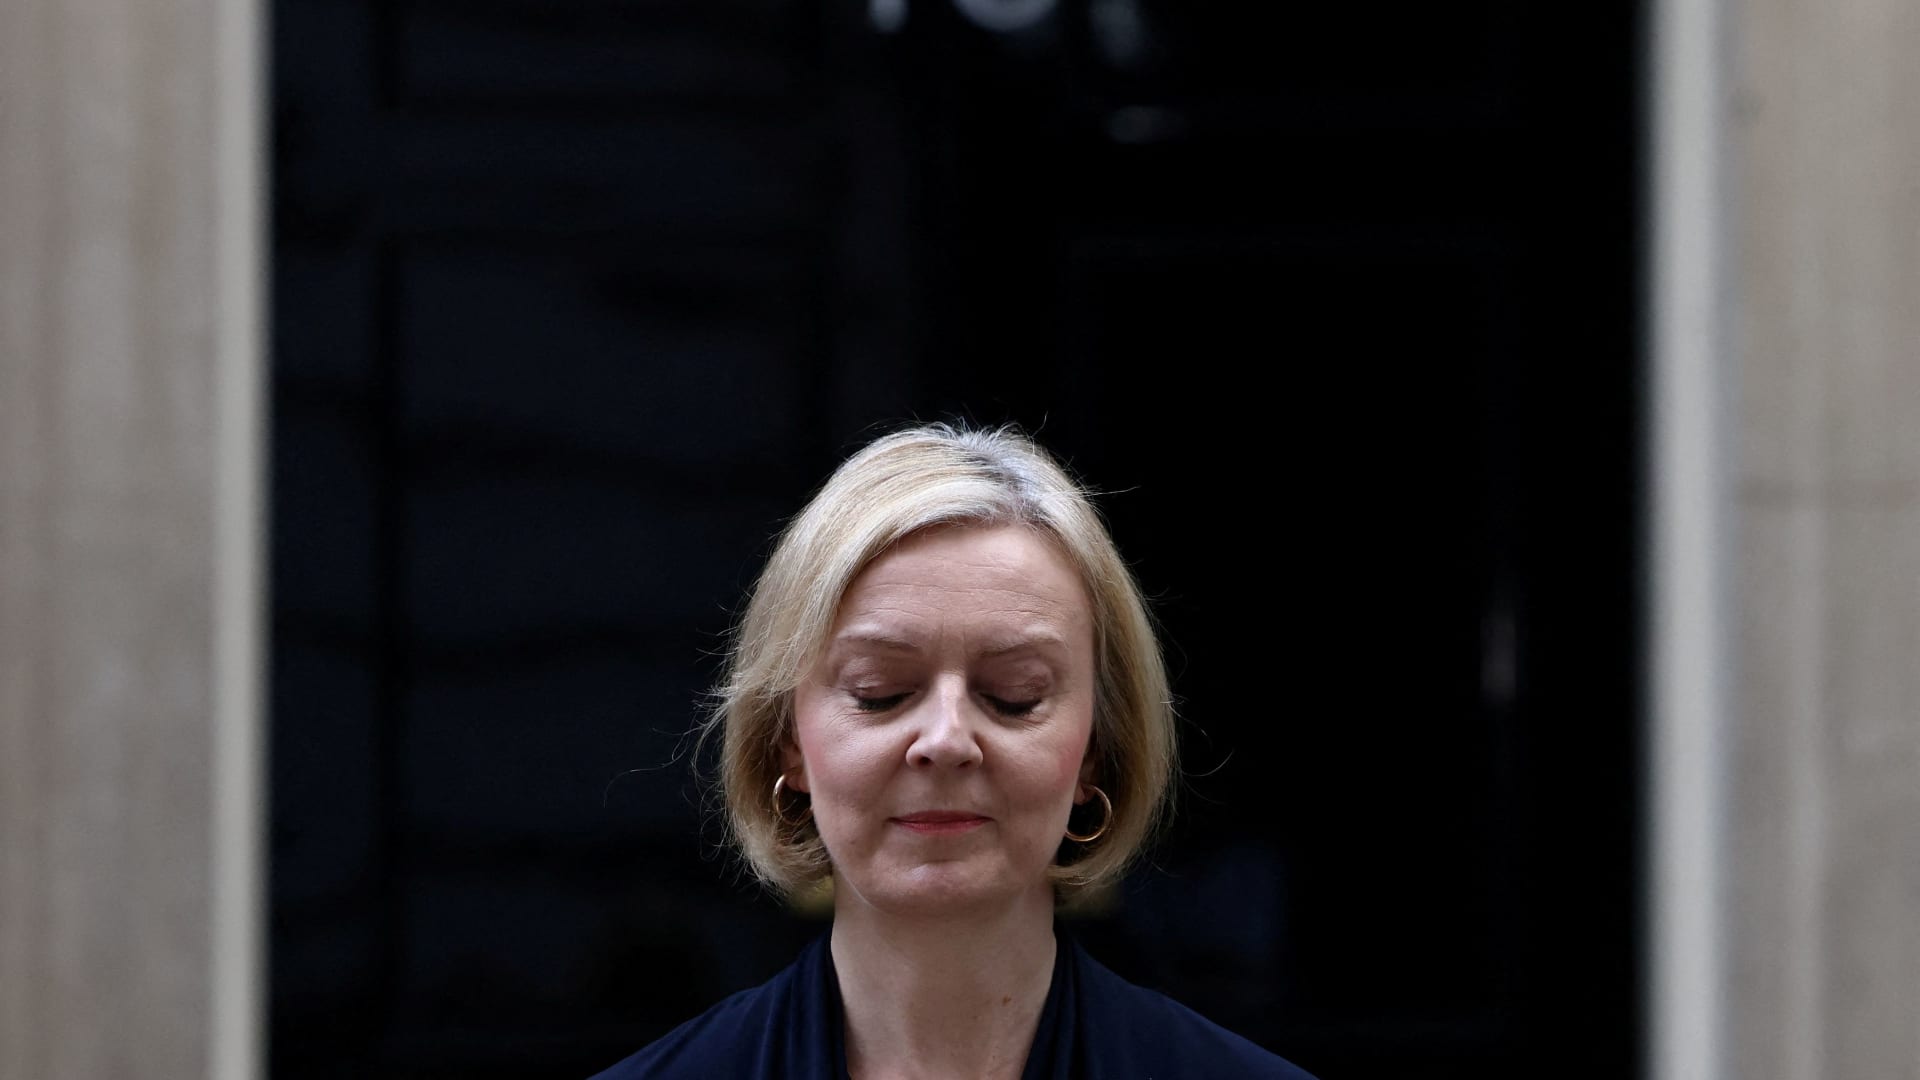 Former UK PM Liz Truss is blaming the left-wing 'economic establishment' for ousting her - CNBC : Former U.K. Prime Minister Liz Truss is blaming a "powerful economic establishment" for bringing her chaotic 44-day tenure to an end last year.  | Tranquility 國際社群